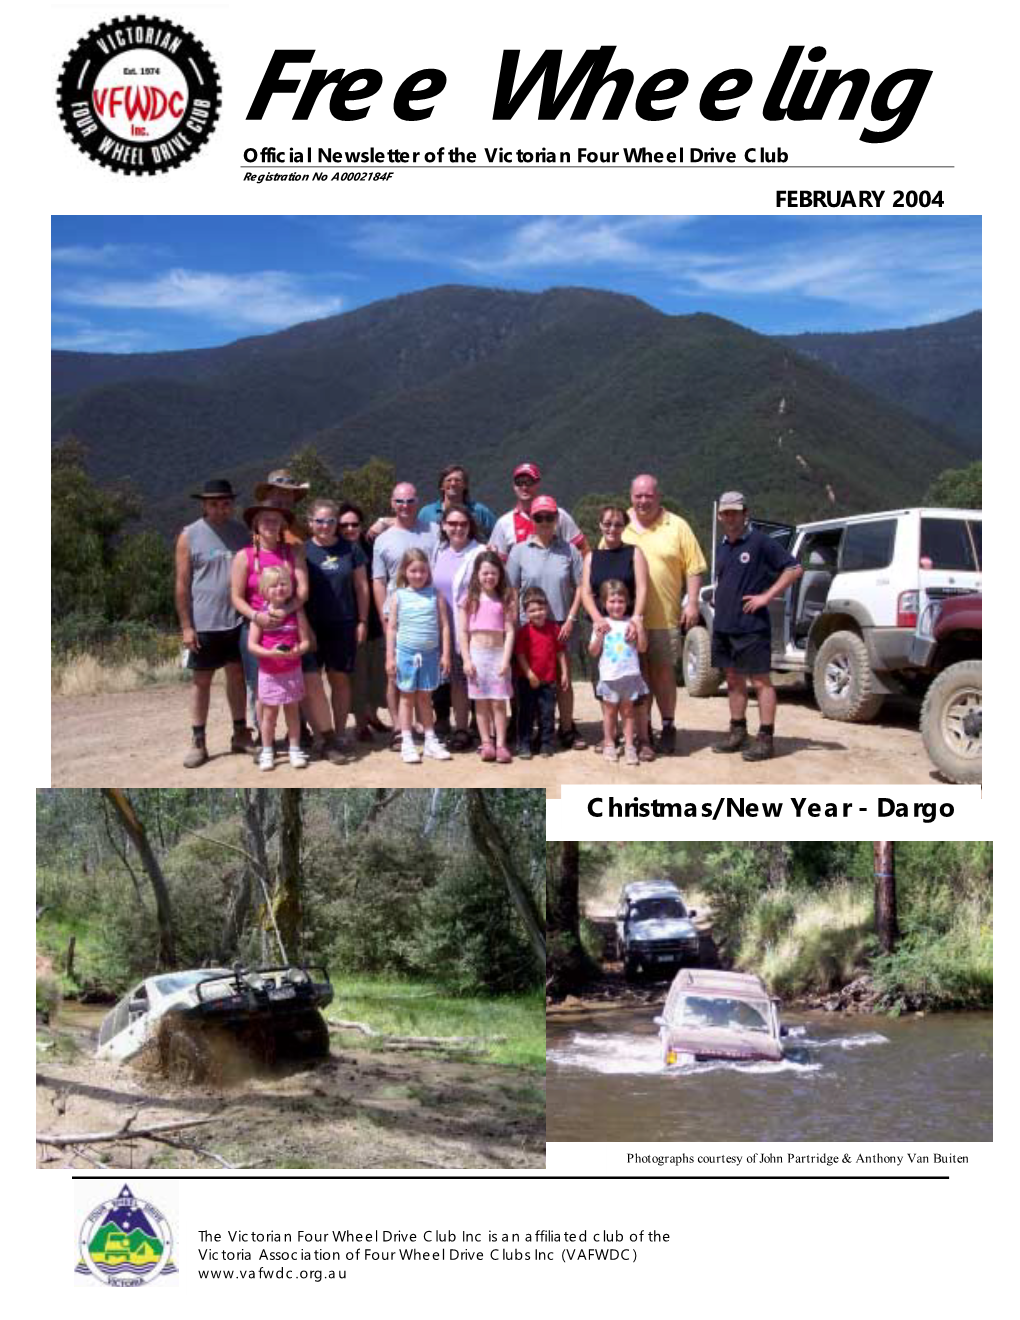 Free Wheeling Official Newsletter of the Victorian Four Wheel Drive Club Registration No A0002184F FEBRUARY 2004